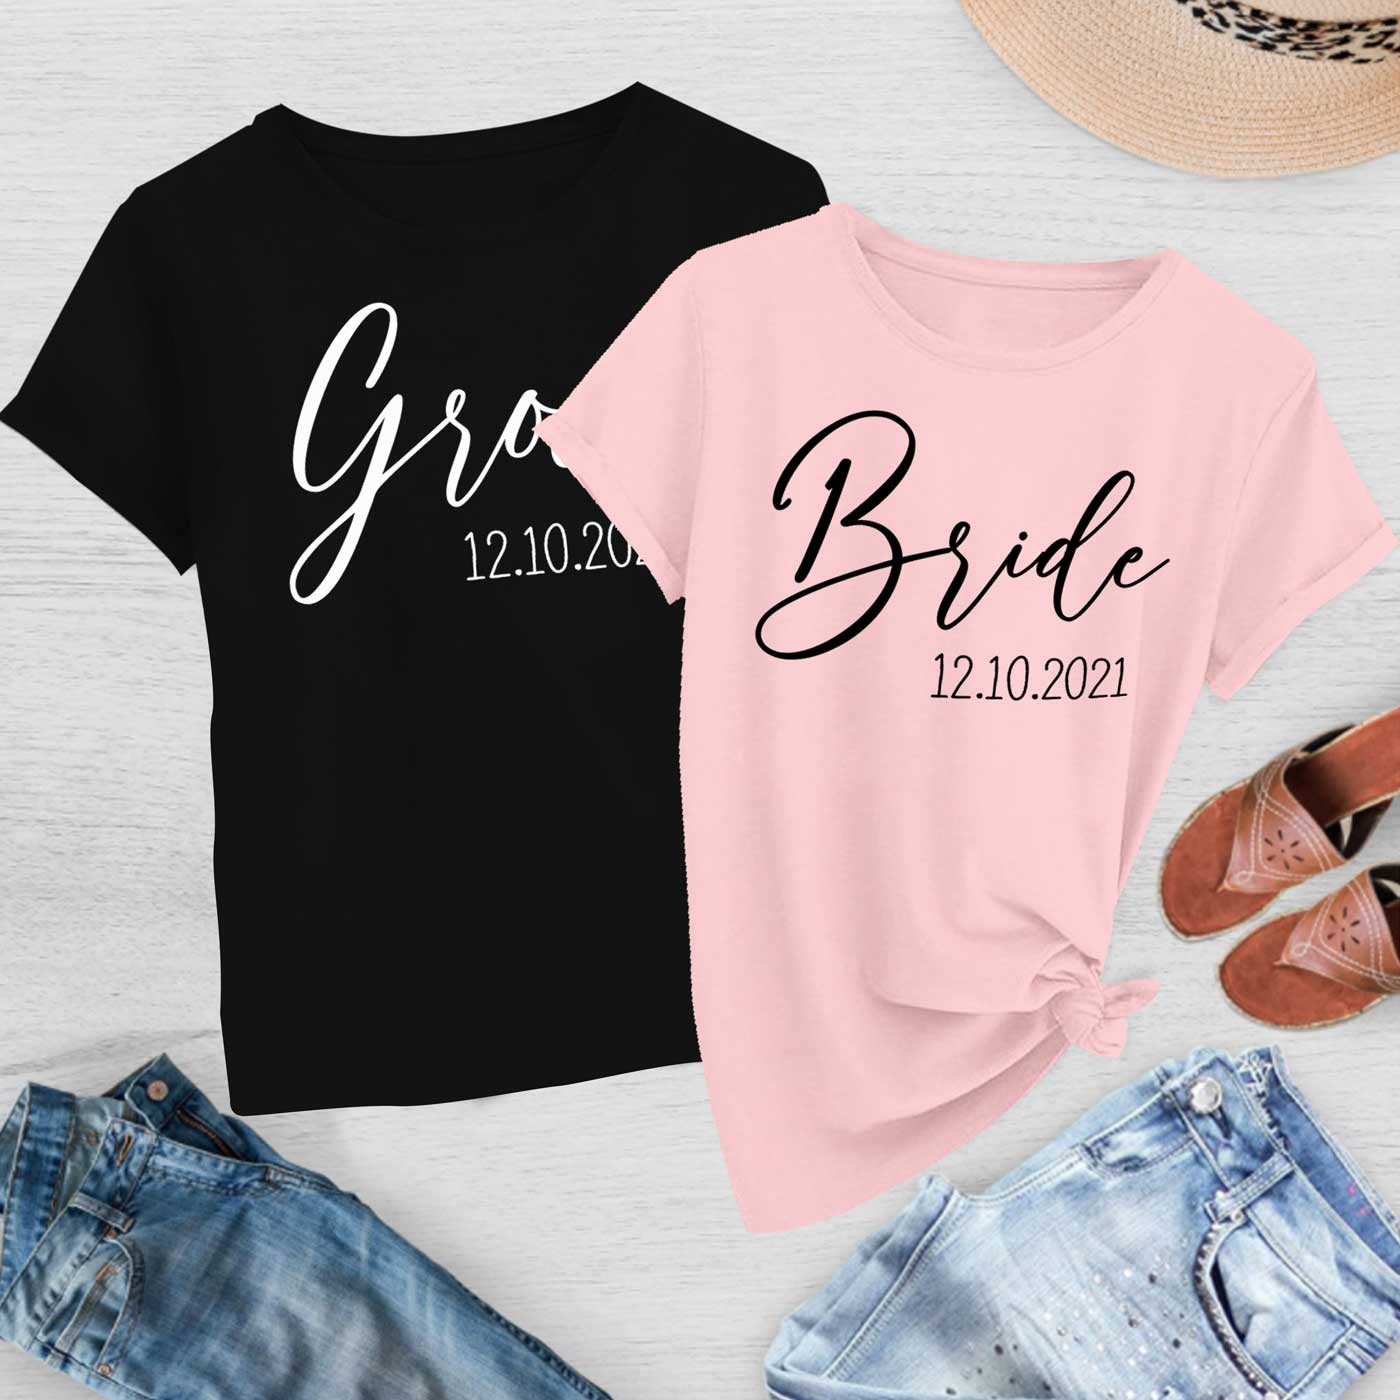 Personalized Bride and Groom T-Shirts (243)